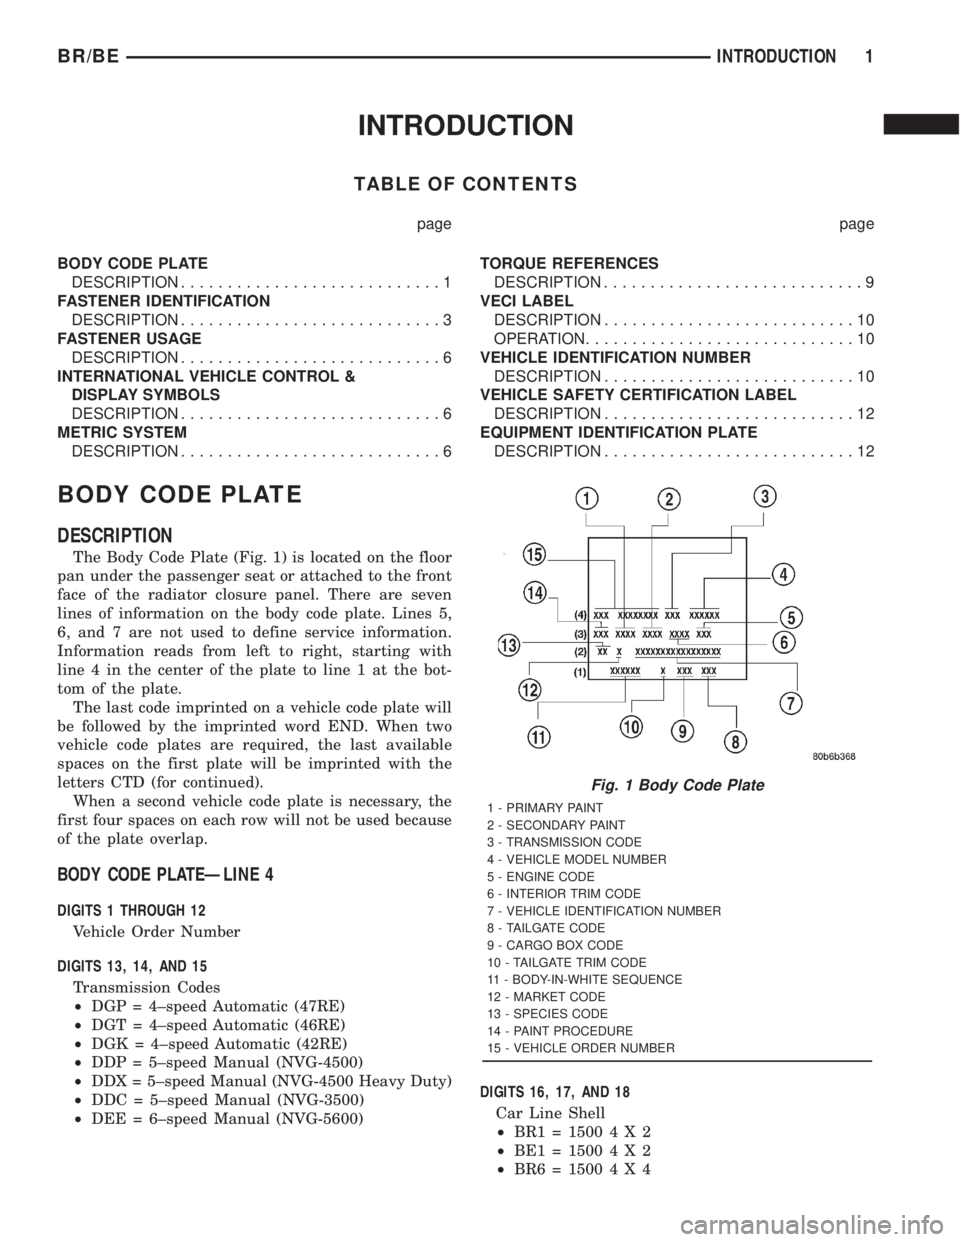 DODGE RAM 2001  Service Repair Manual INTRODUCTION
TABLE OF CONTENTS
page page
BODY CODE PLATE
DESCRIPTION............................1
FASTENER IDENTIFICATION
DESCRIPTION............................3
FASTENER USAGE
DESCRIPTION...........